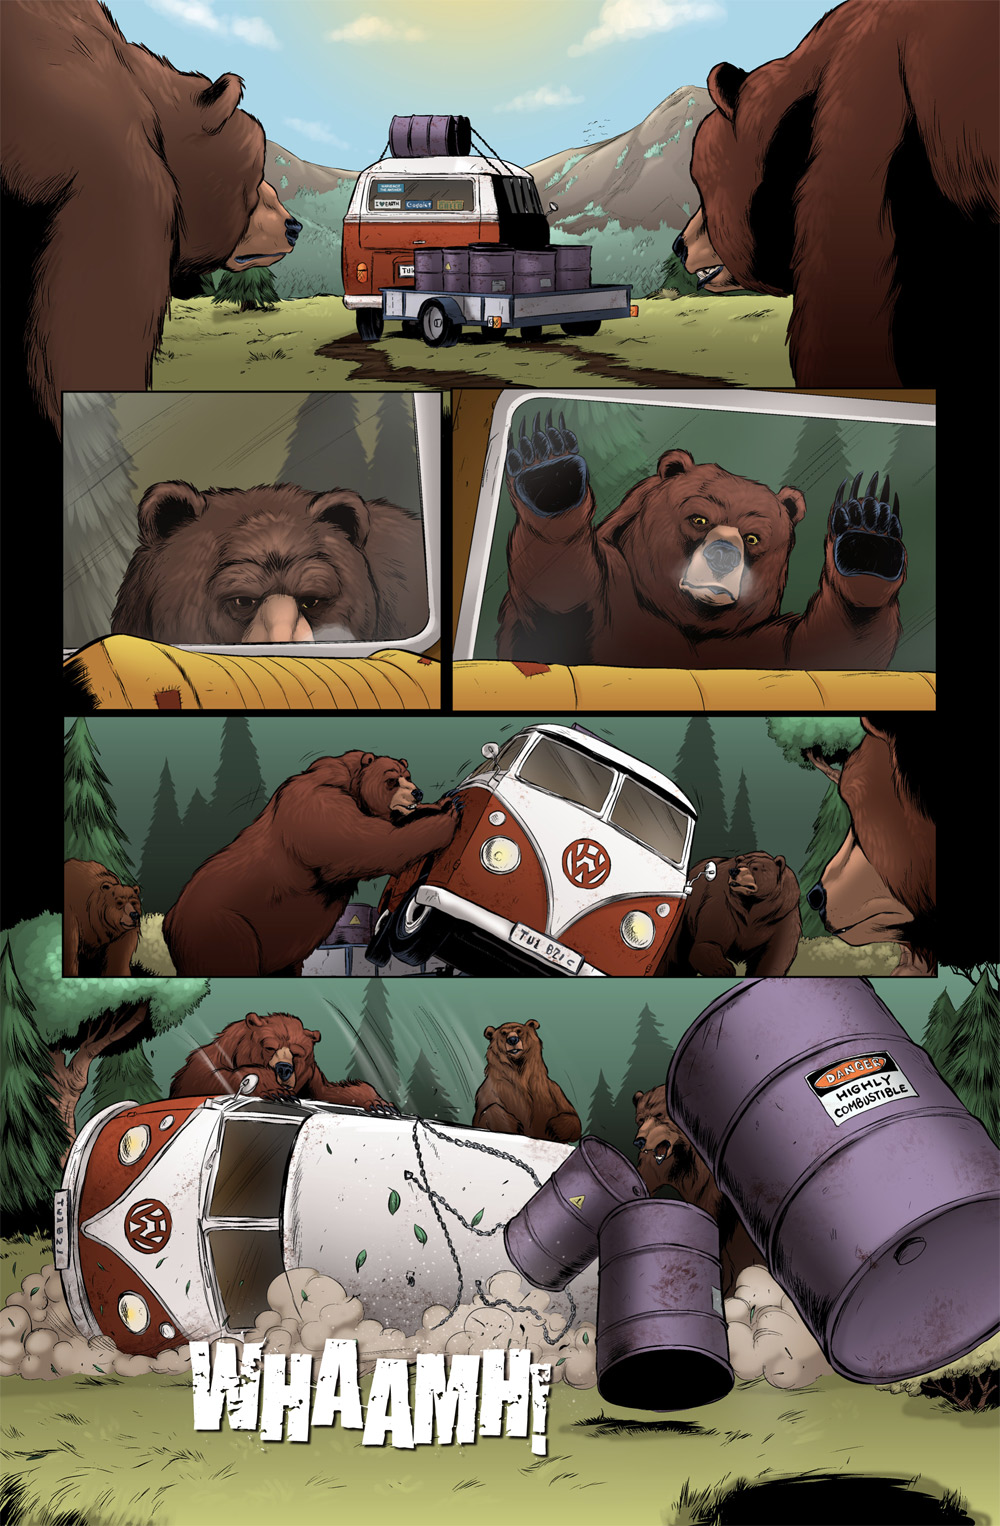 see how that one bear almost pushed the van on top of his friend.  They will probably have to have a talk later about being more attentive to one another..